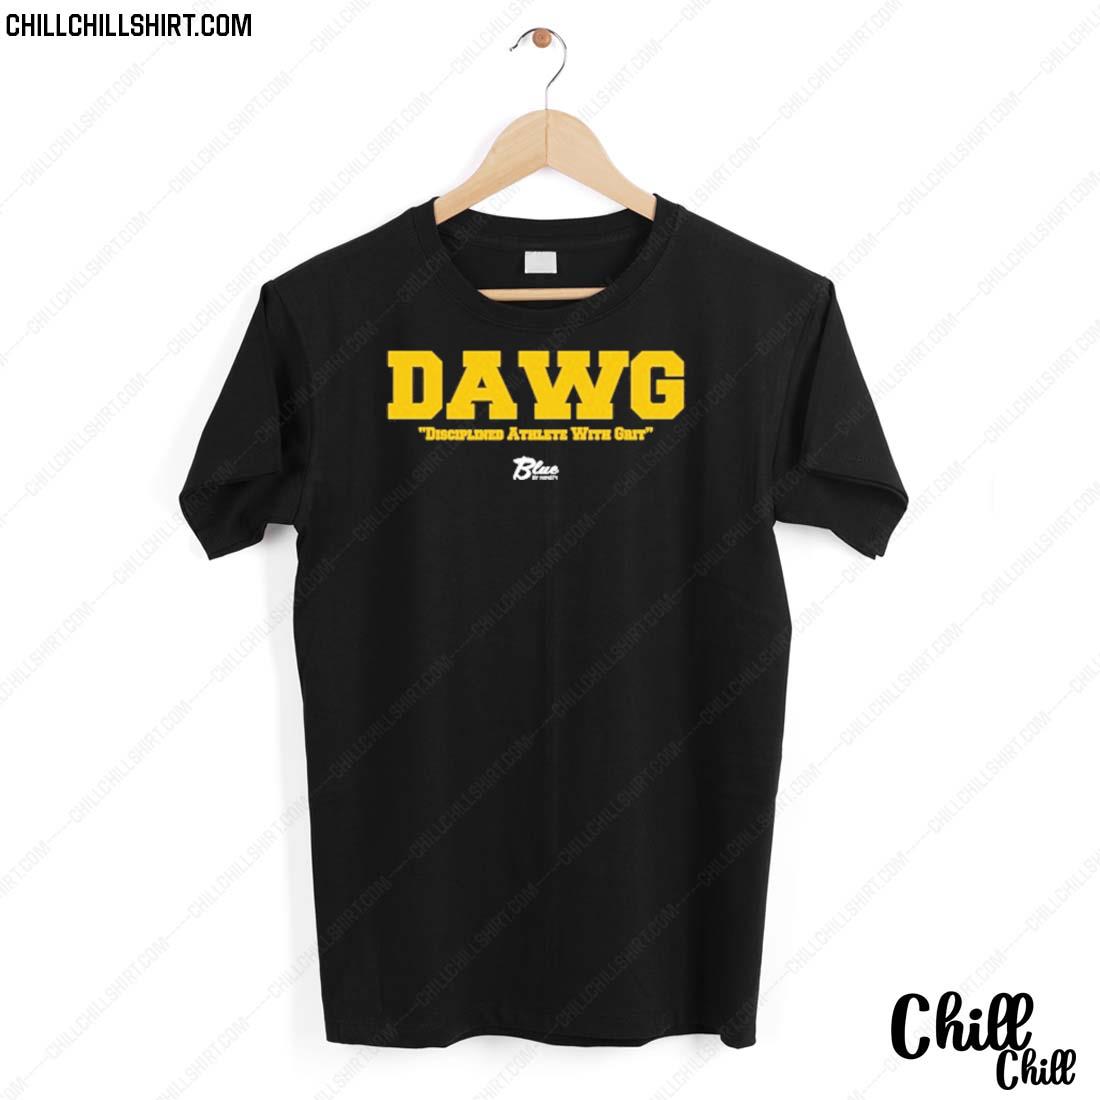 Nice dawg Disciplined Athlete With Grit T-shirt